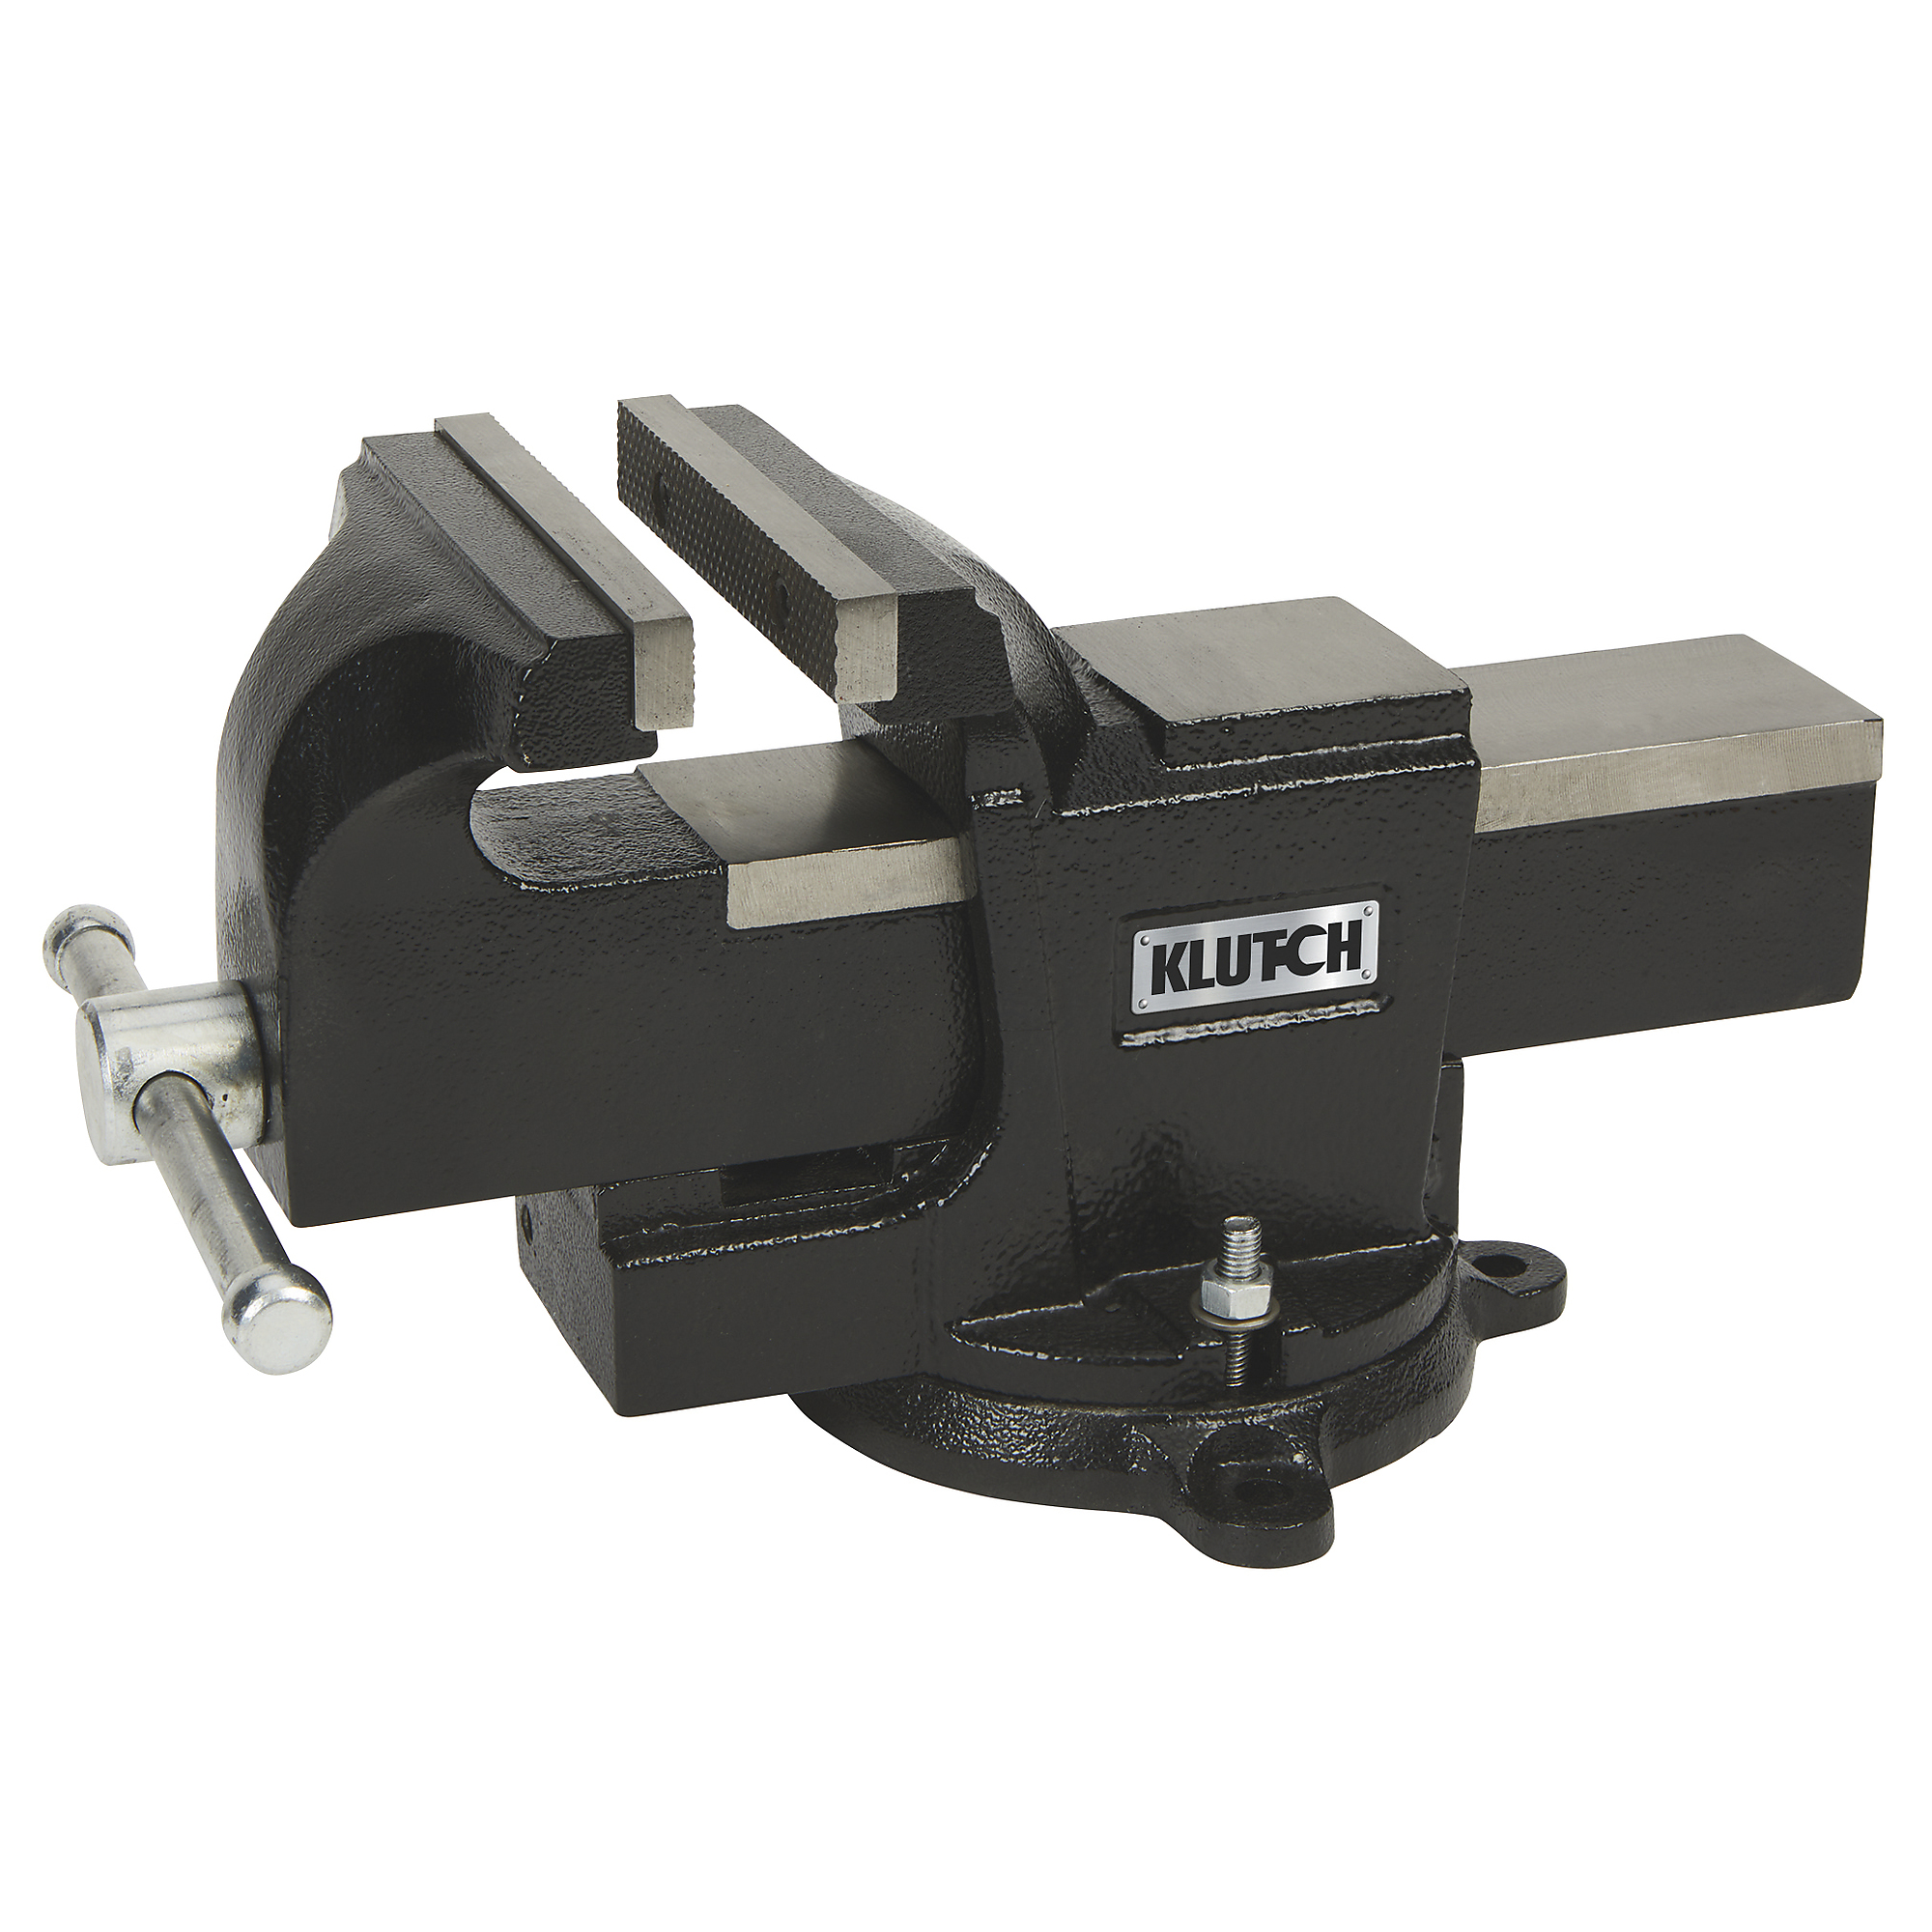 Klutch Quick-Release Bench Vise, 5Inch Jaw Width, Model AT-QRV-05